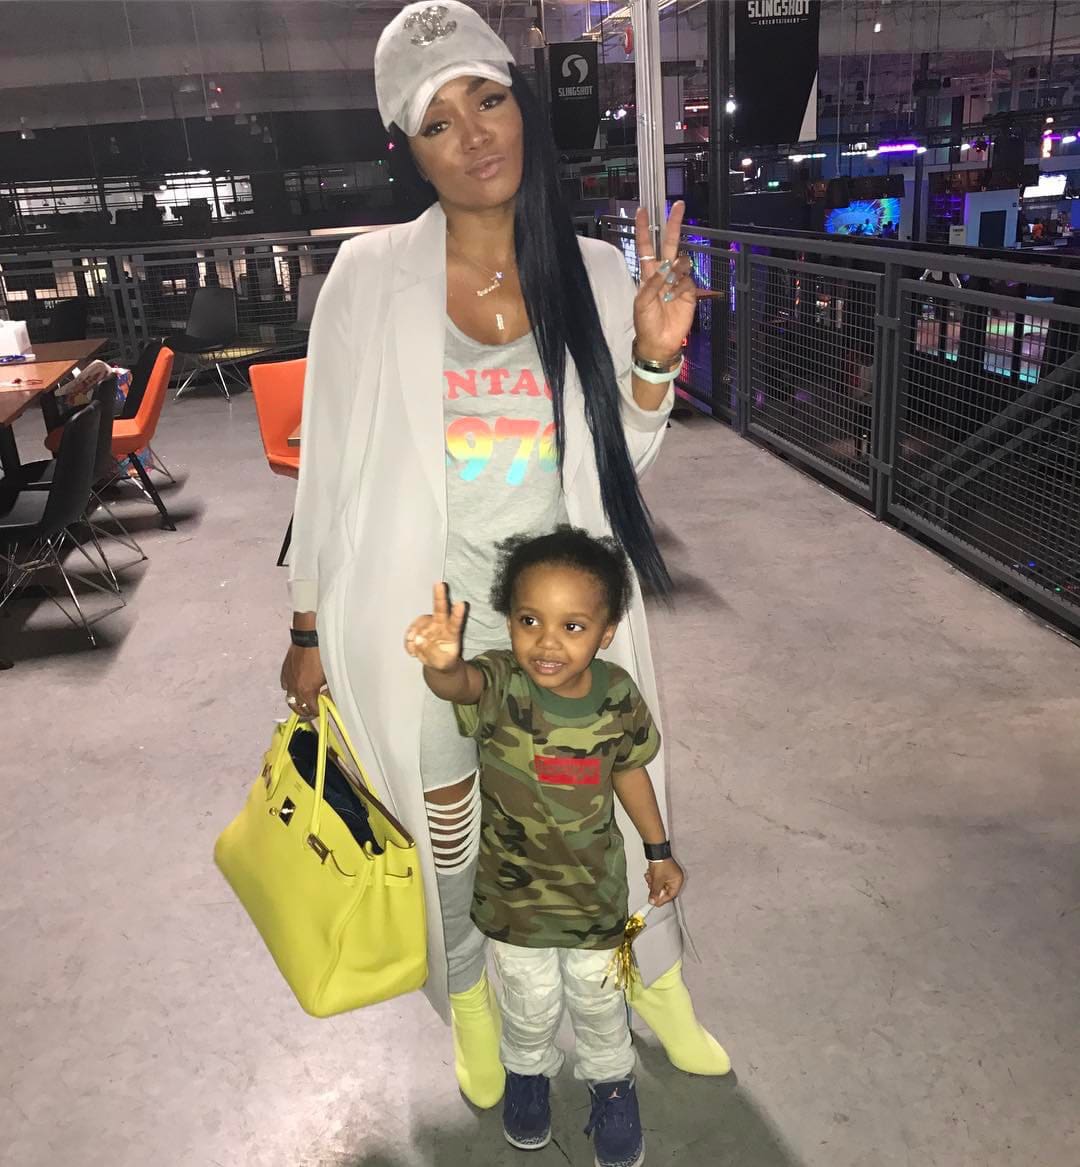 Rasheeda Frost Celebrates The Birthday Of Her Son, Karter Frost - Check Out The Never Before Seen Pics